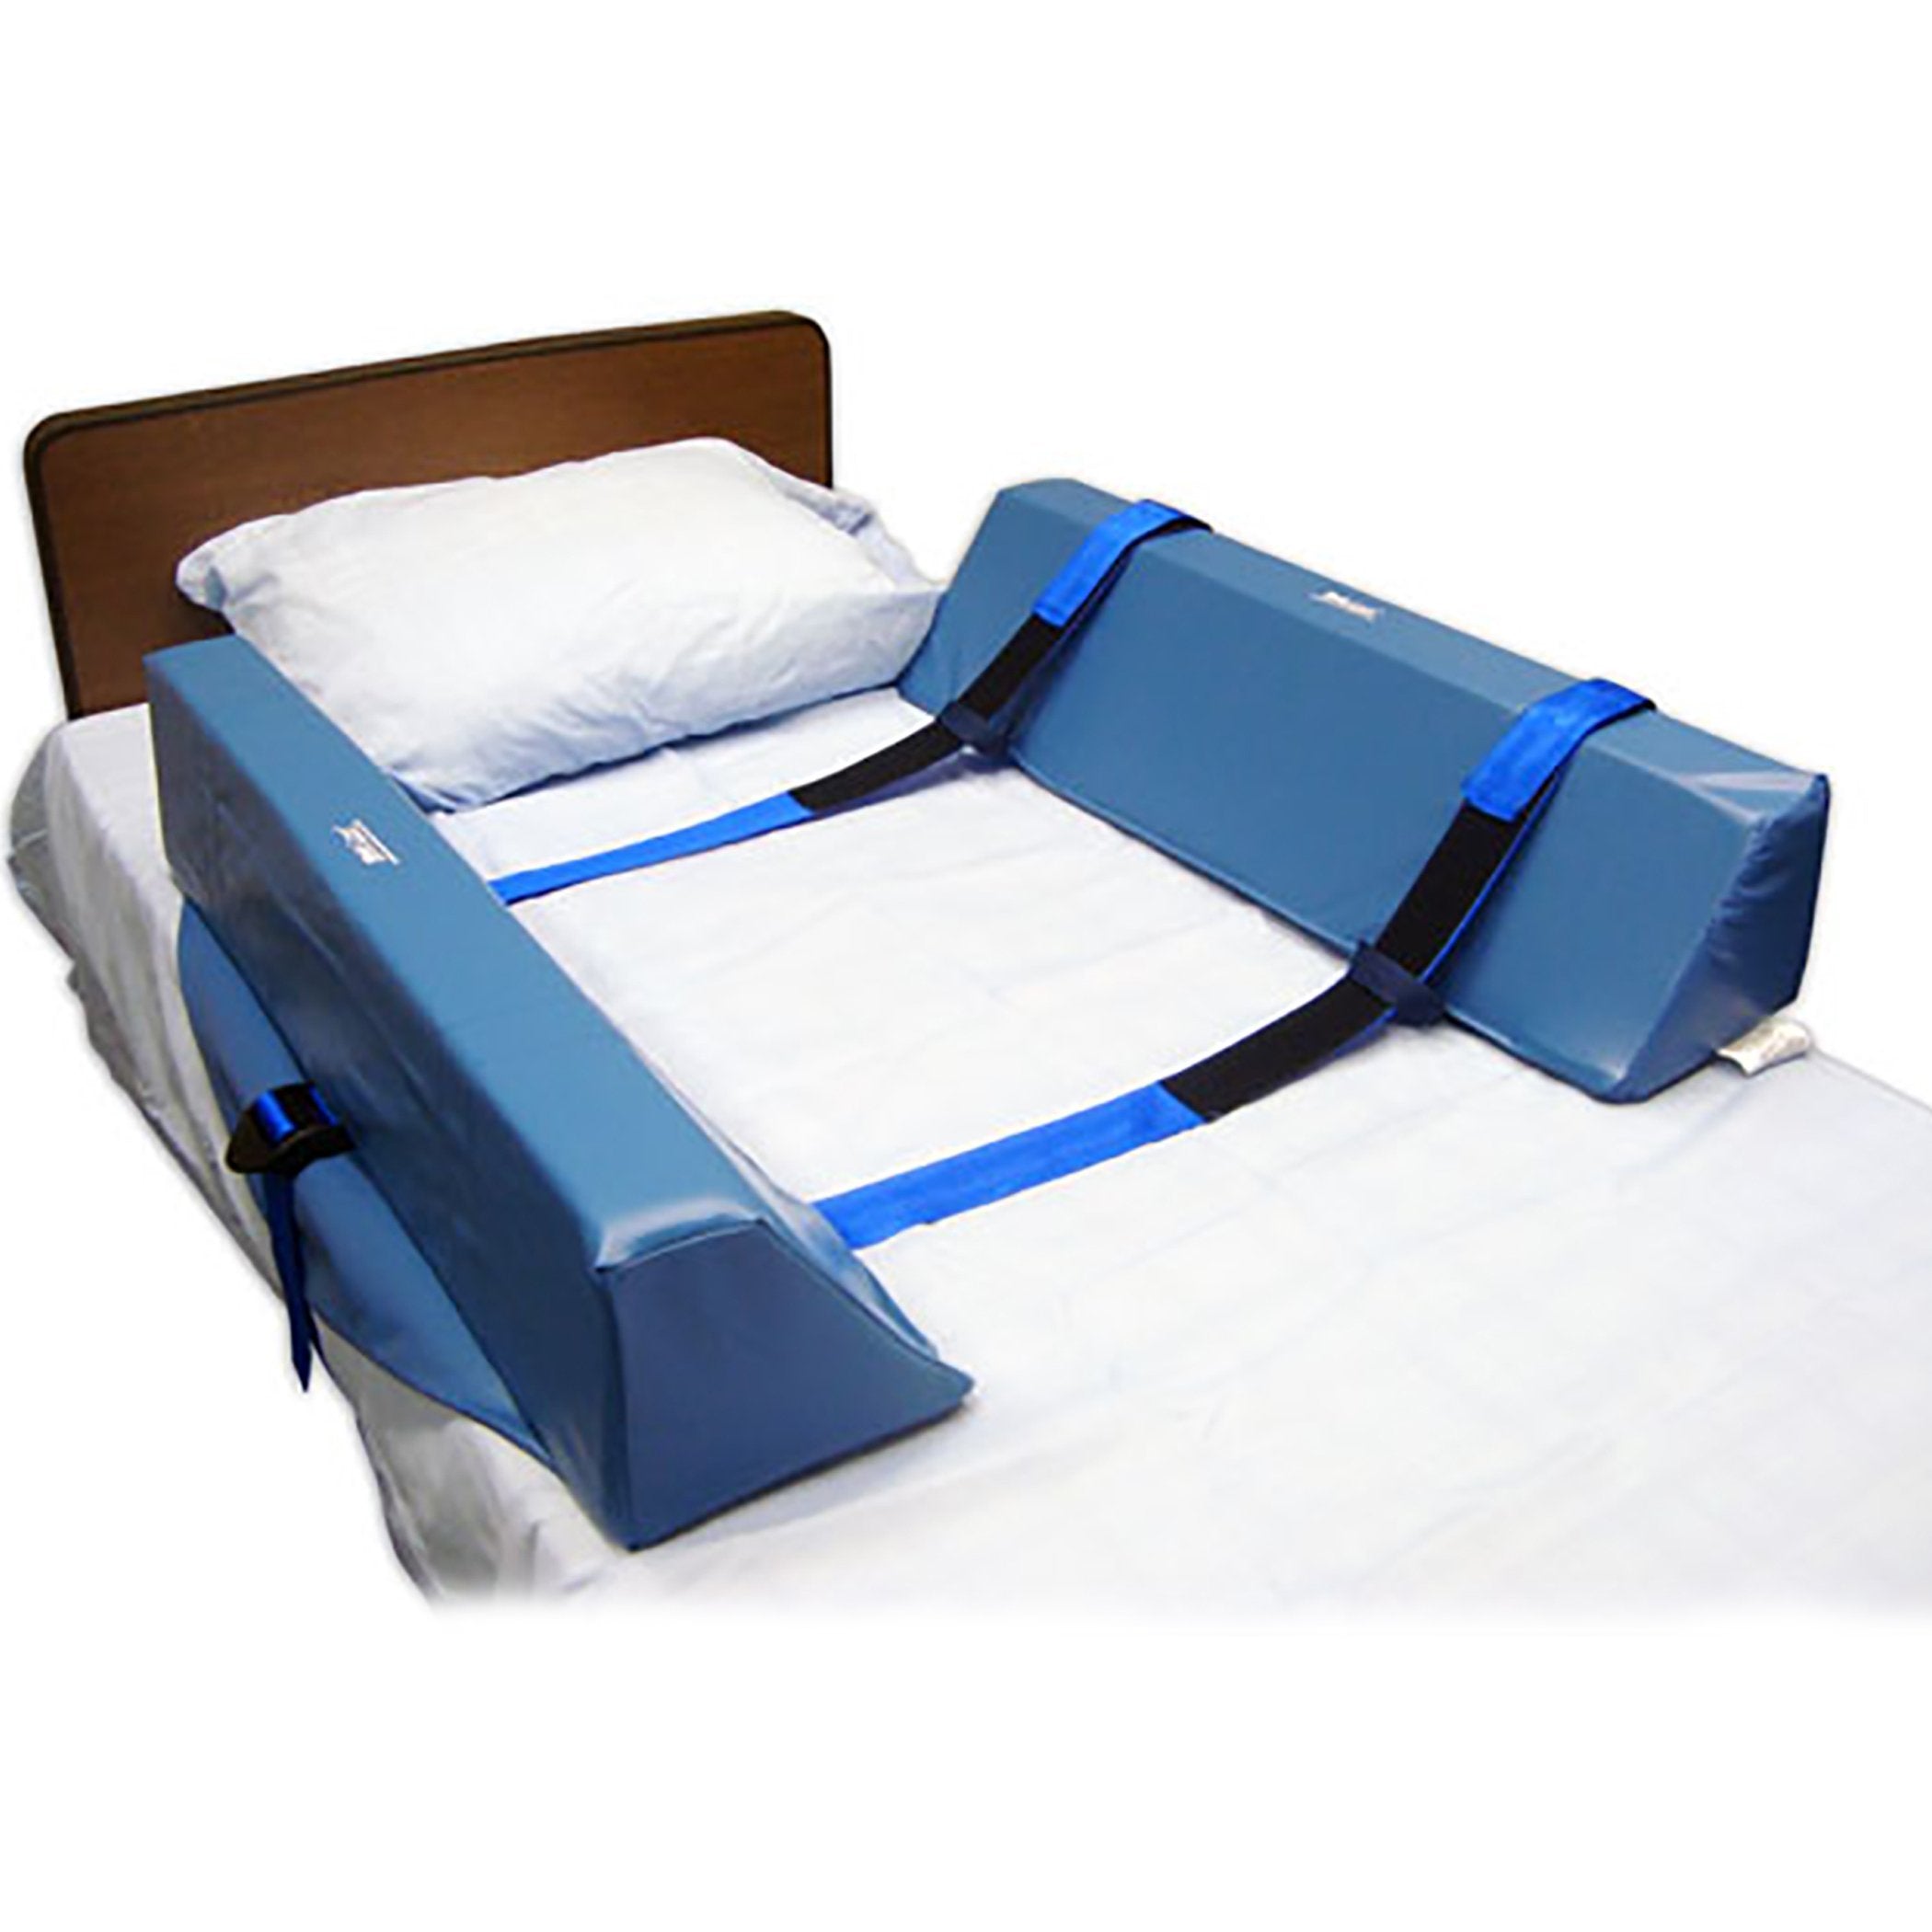 Roll-Control Bed Bolster Skil-Care 34 W X 8 D X 7 H Inch Foam Strap Fastening with Buckle